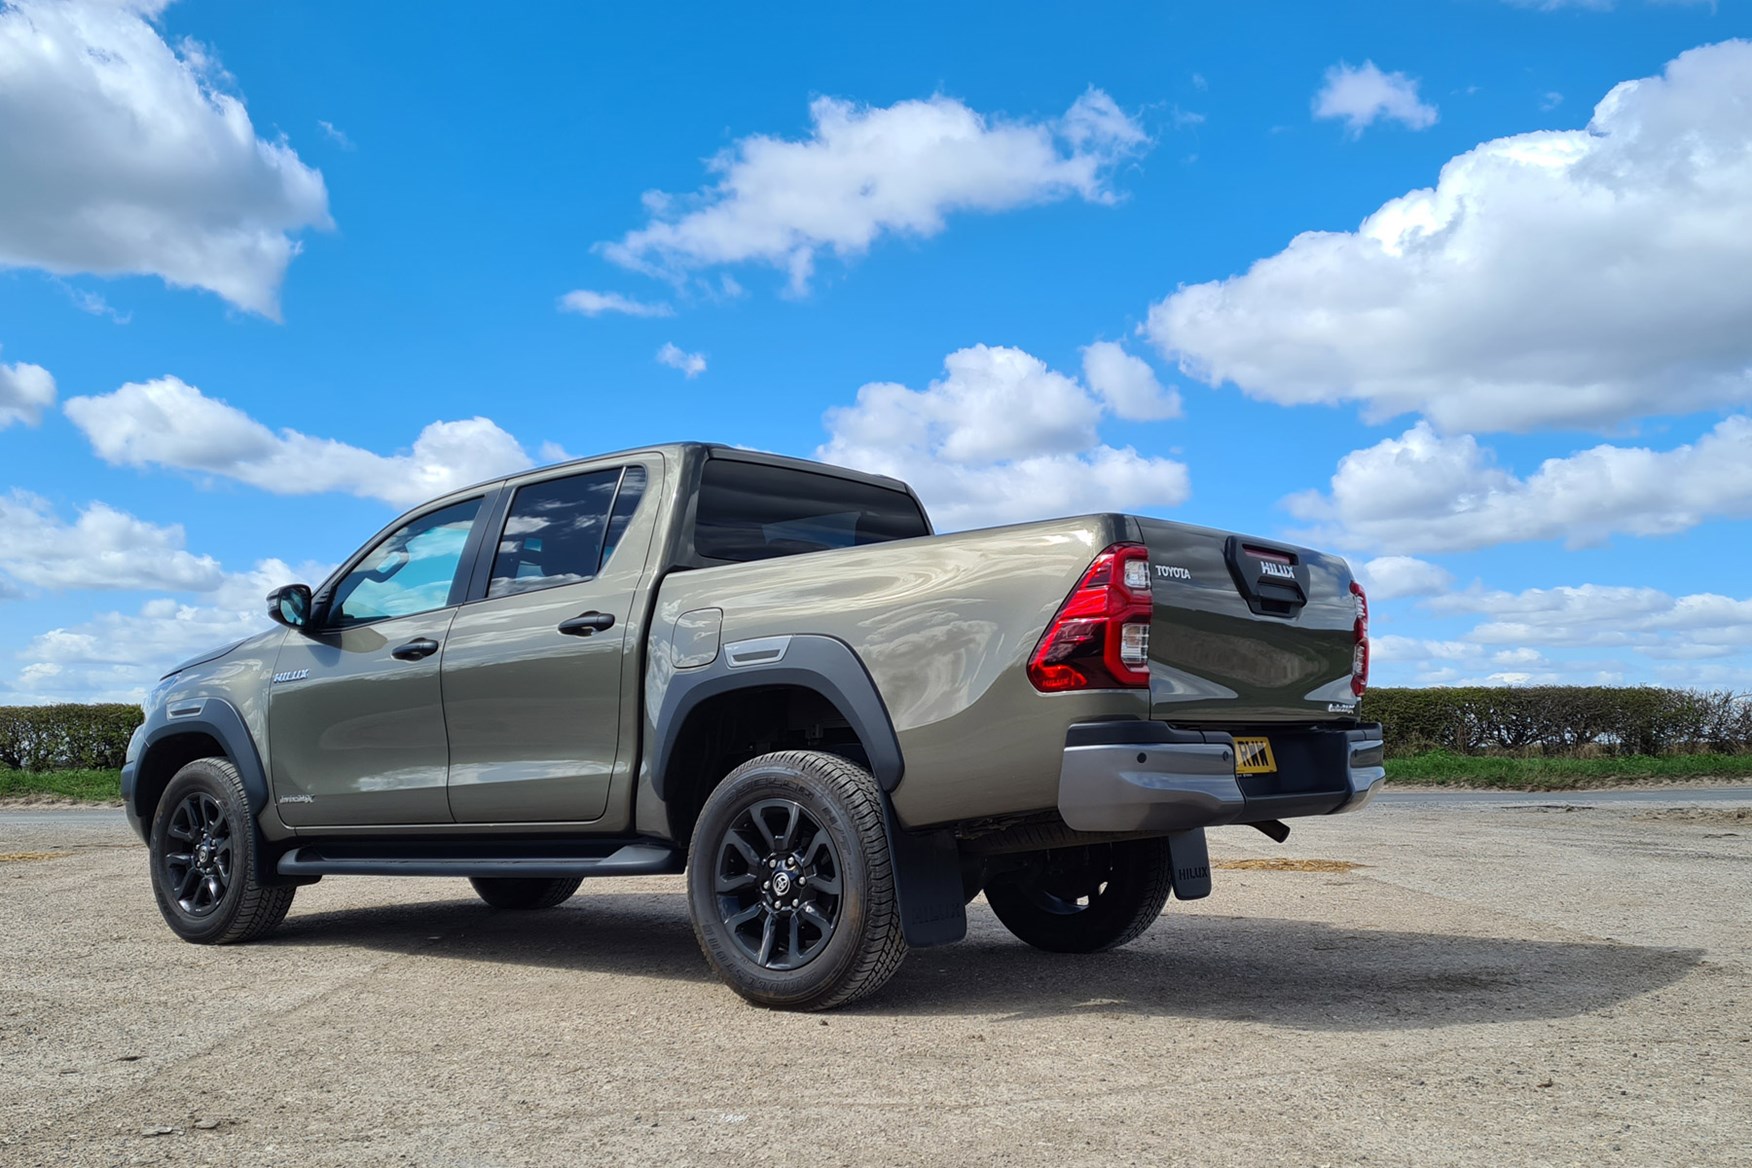 Toyota Hilux Invincible X 2.8D manual review - rear, green